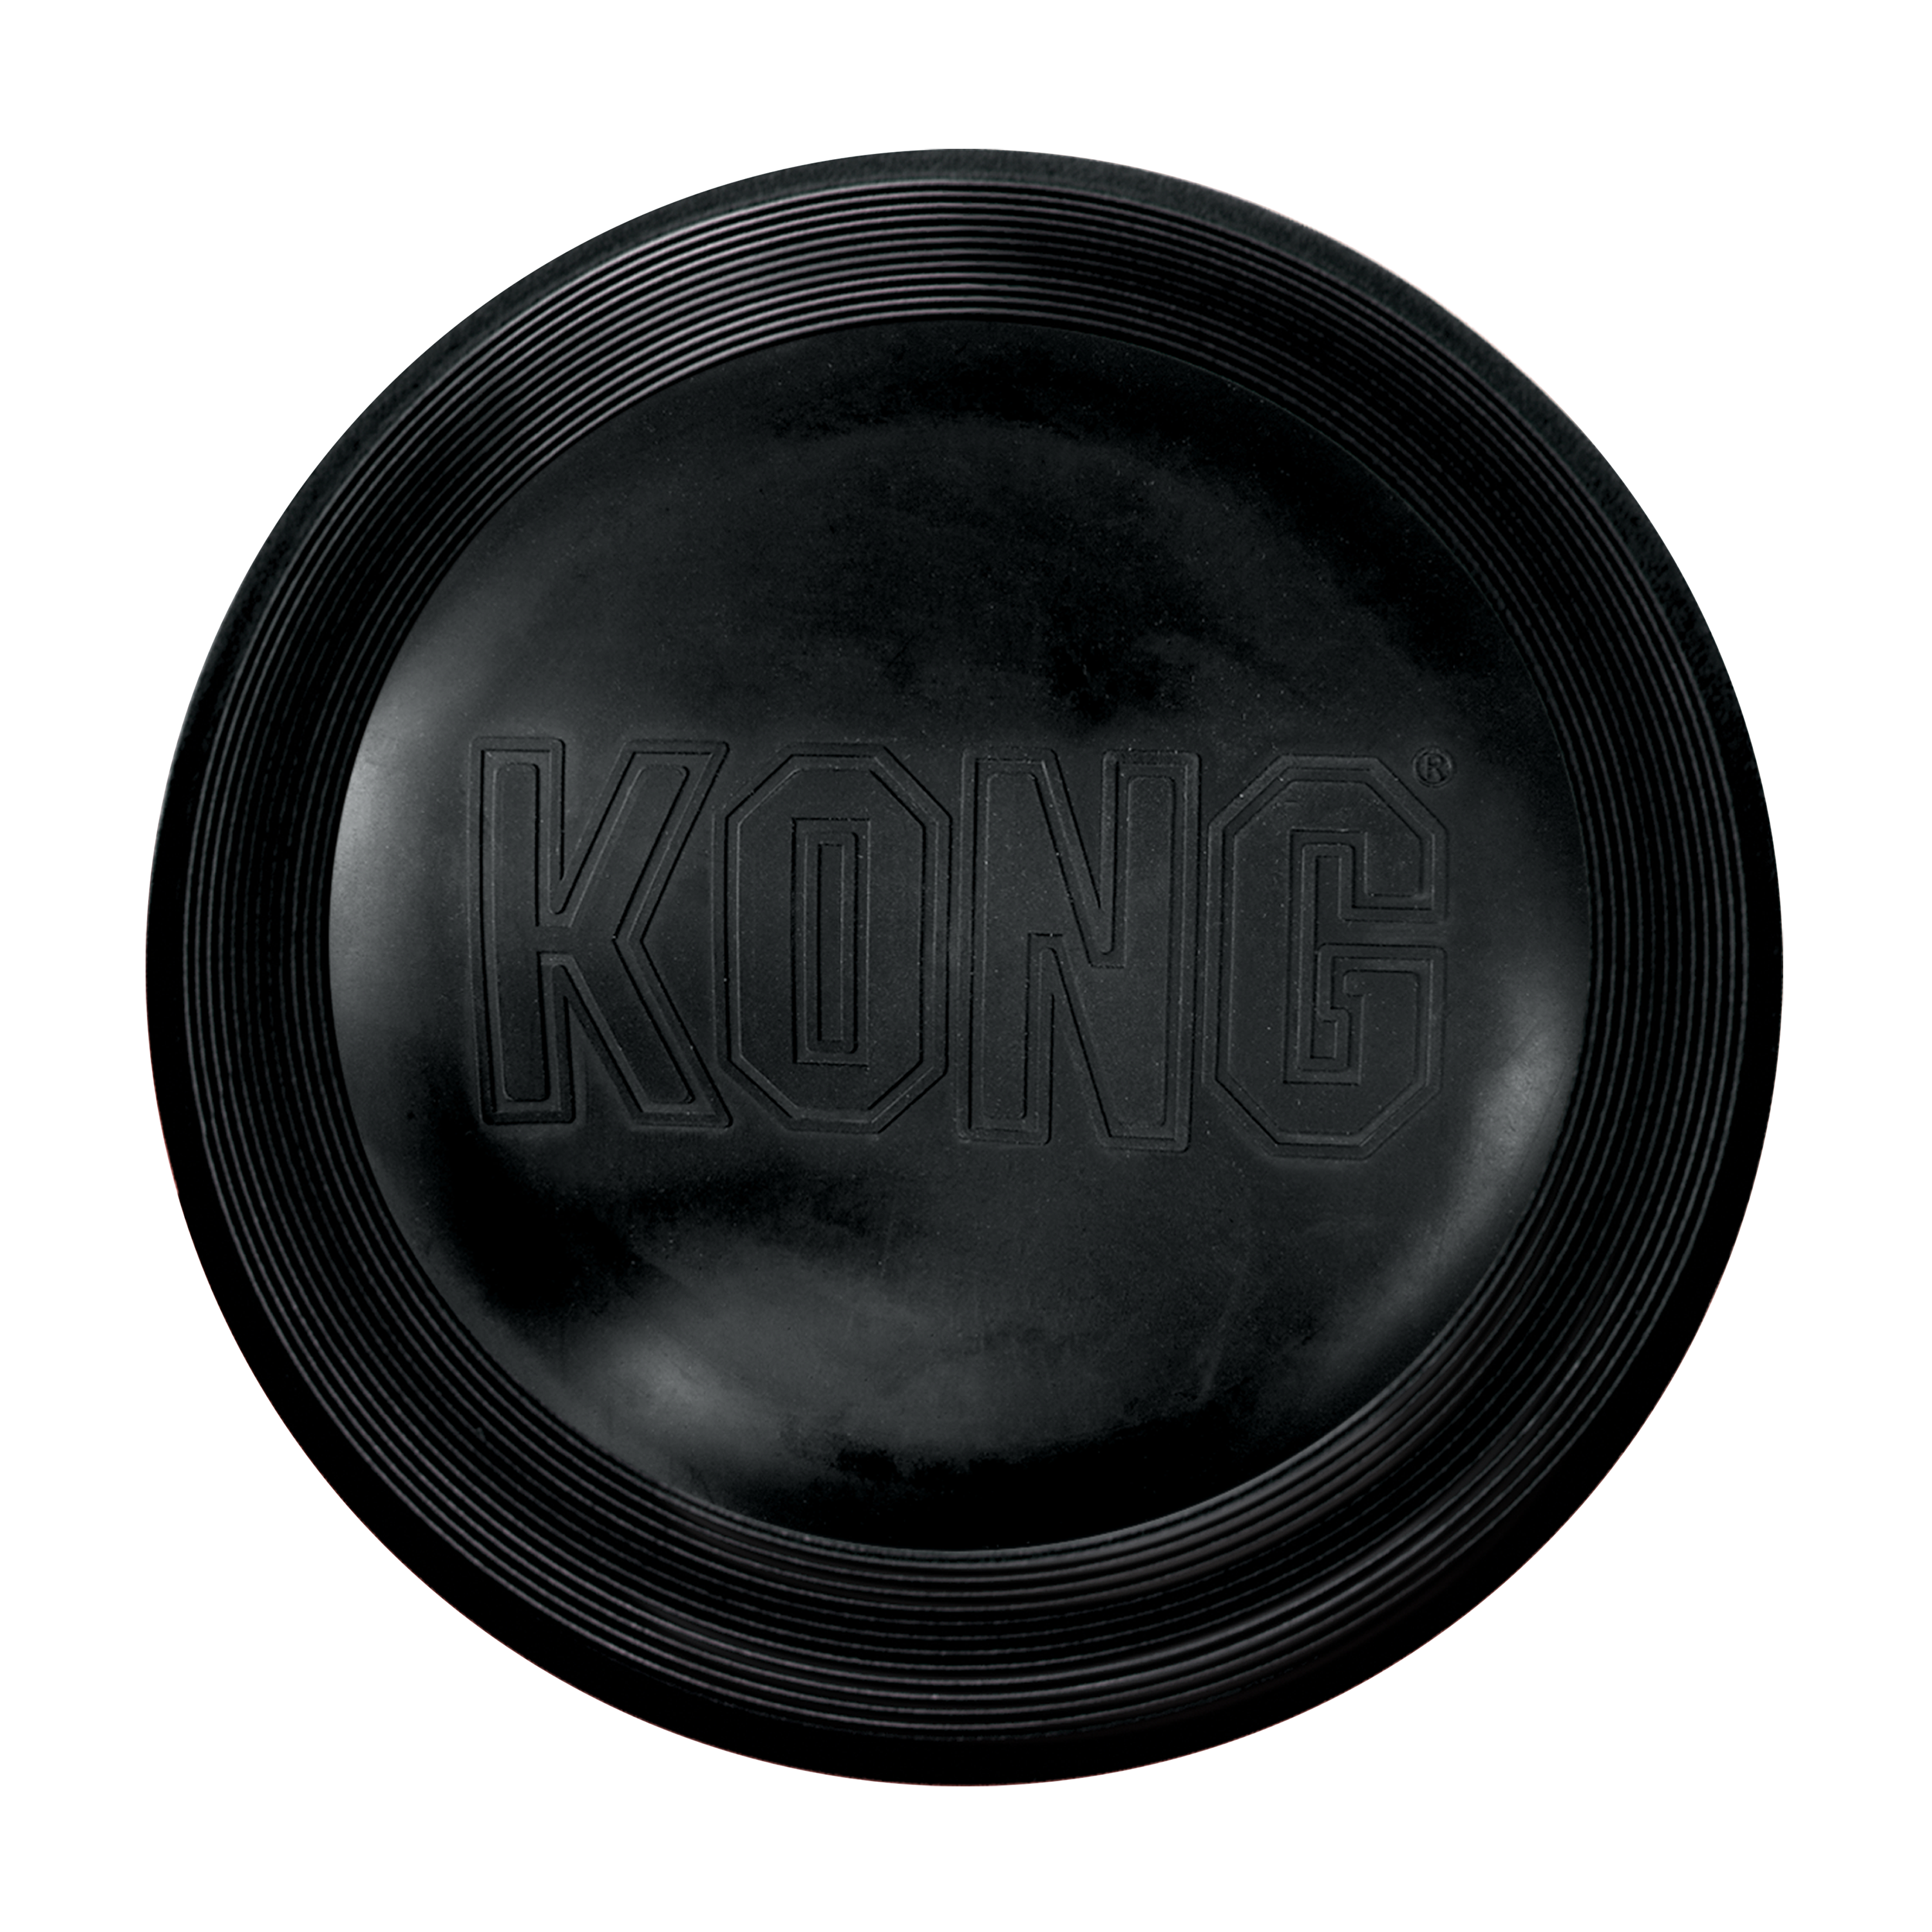 KONG Extreme Flyer offpack imagen de producto